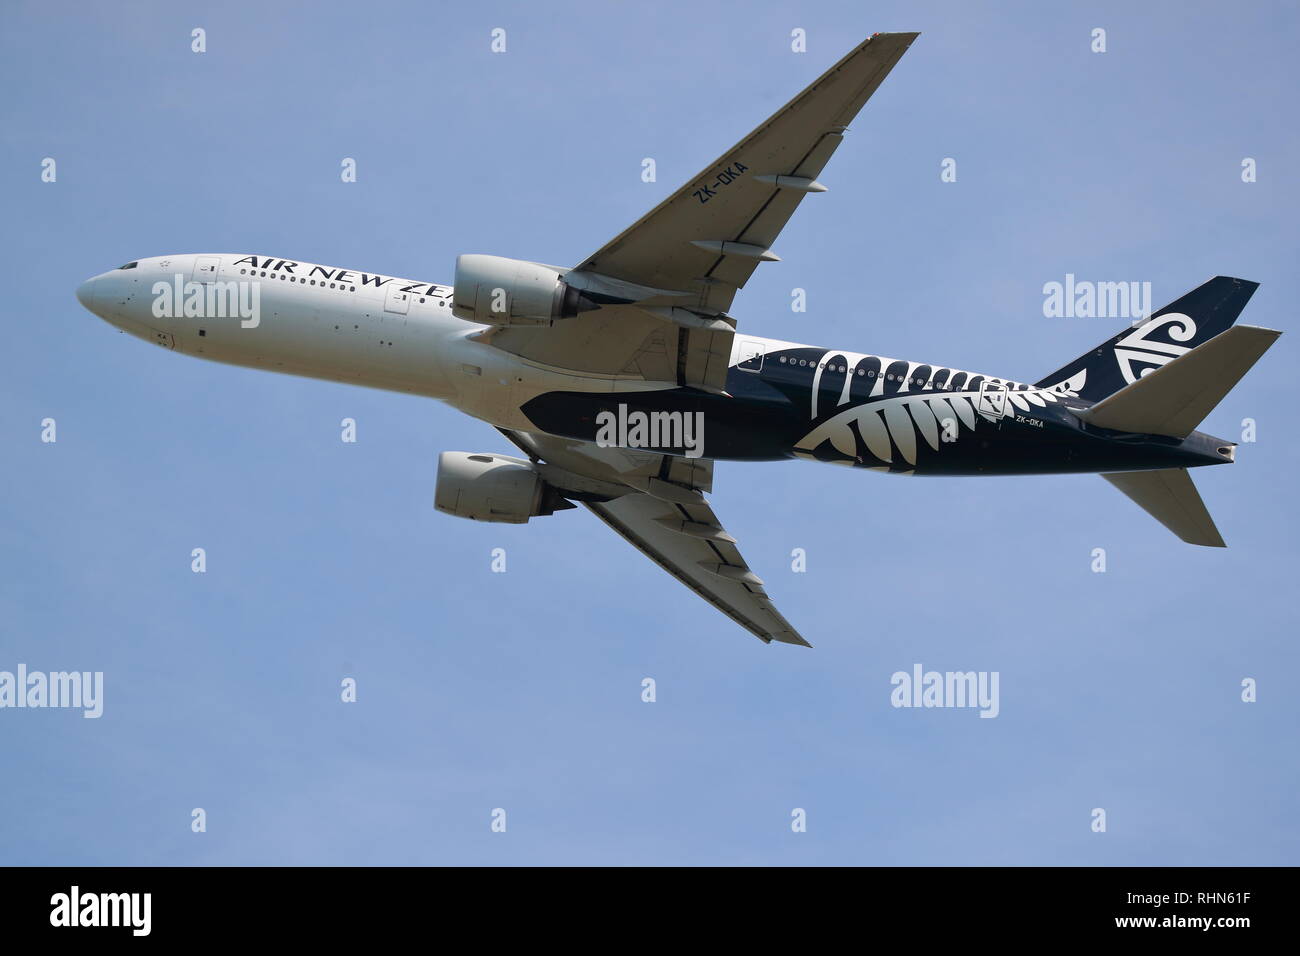 Air New Zealand Boeing 777 taking off from Auckland Airport, New Zealand Stock Photo